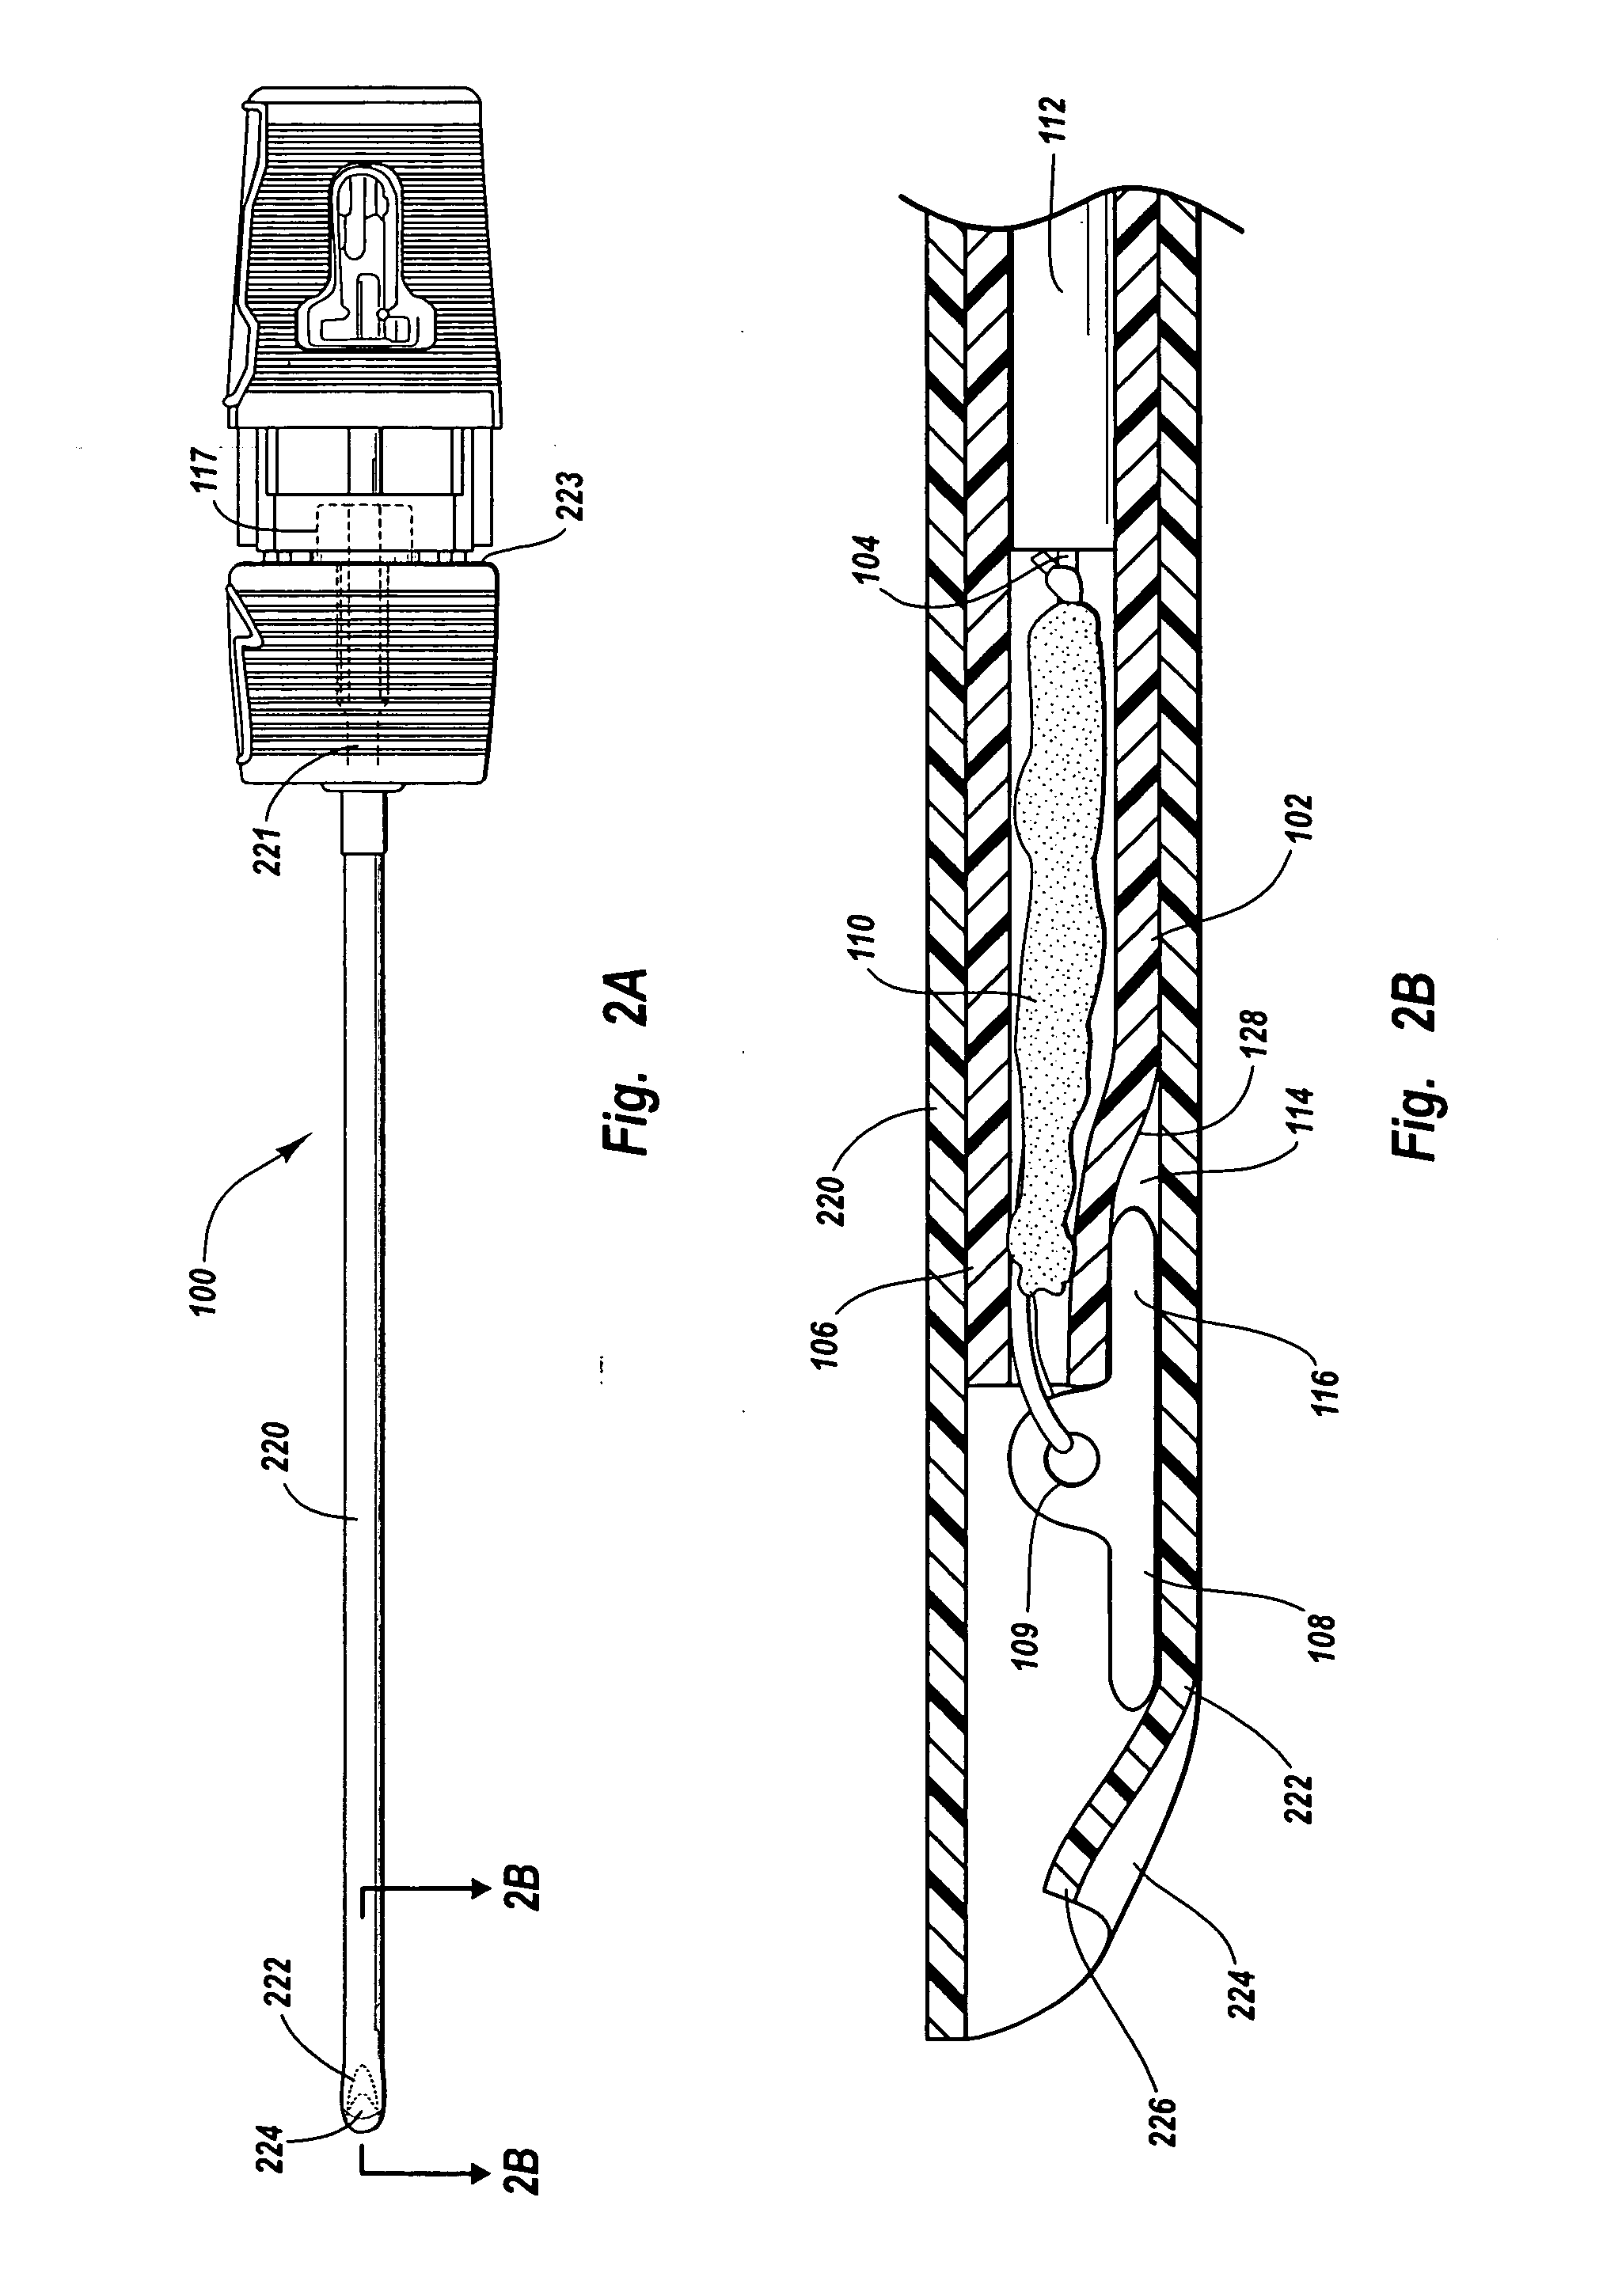 Vascular insertion sheath with stiffened tip